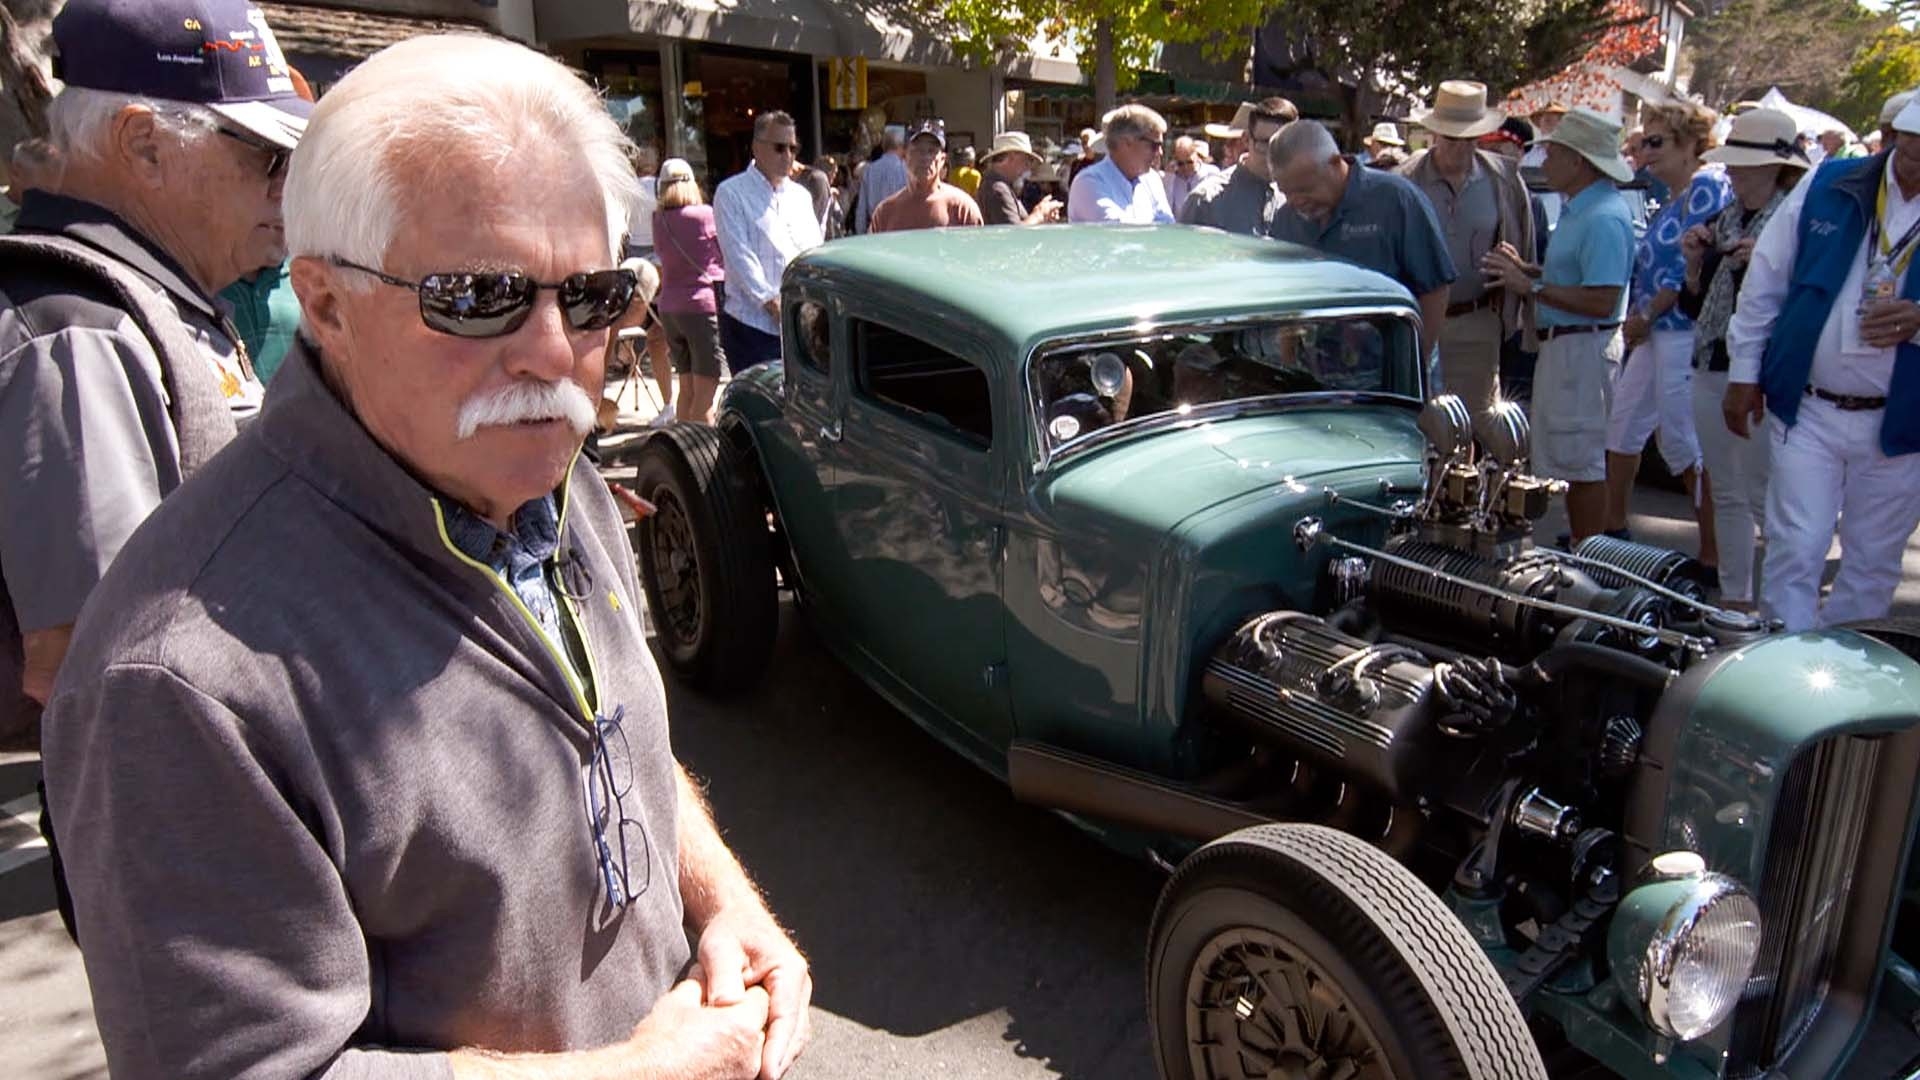 Chasing Classic Cars Show - Full Episodes on Demand - MotorTrend